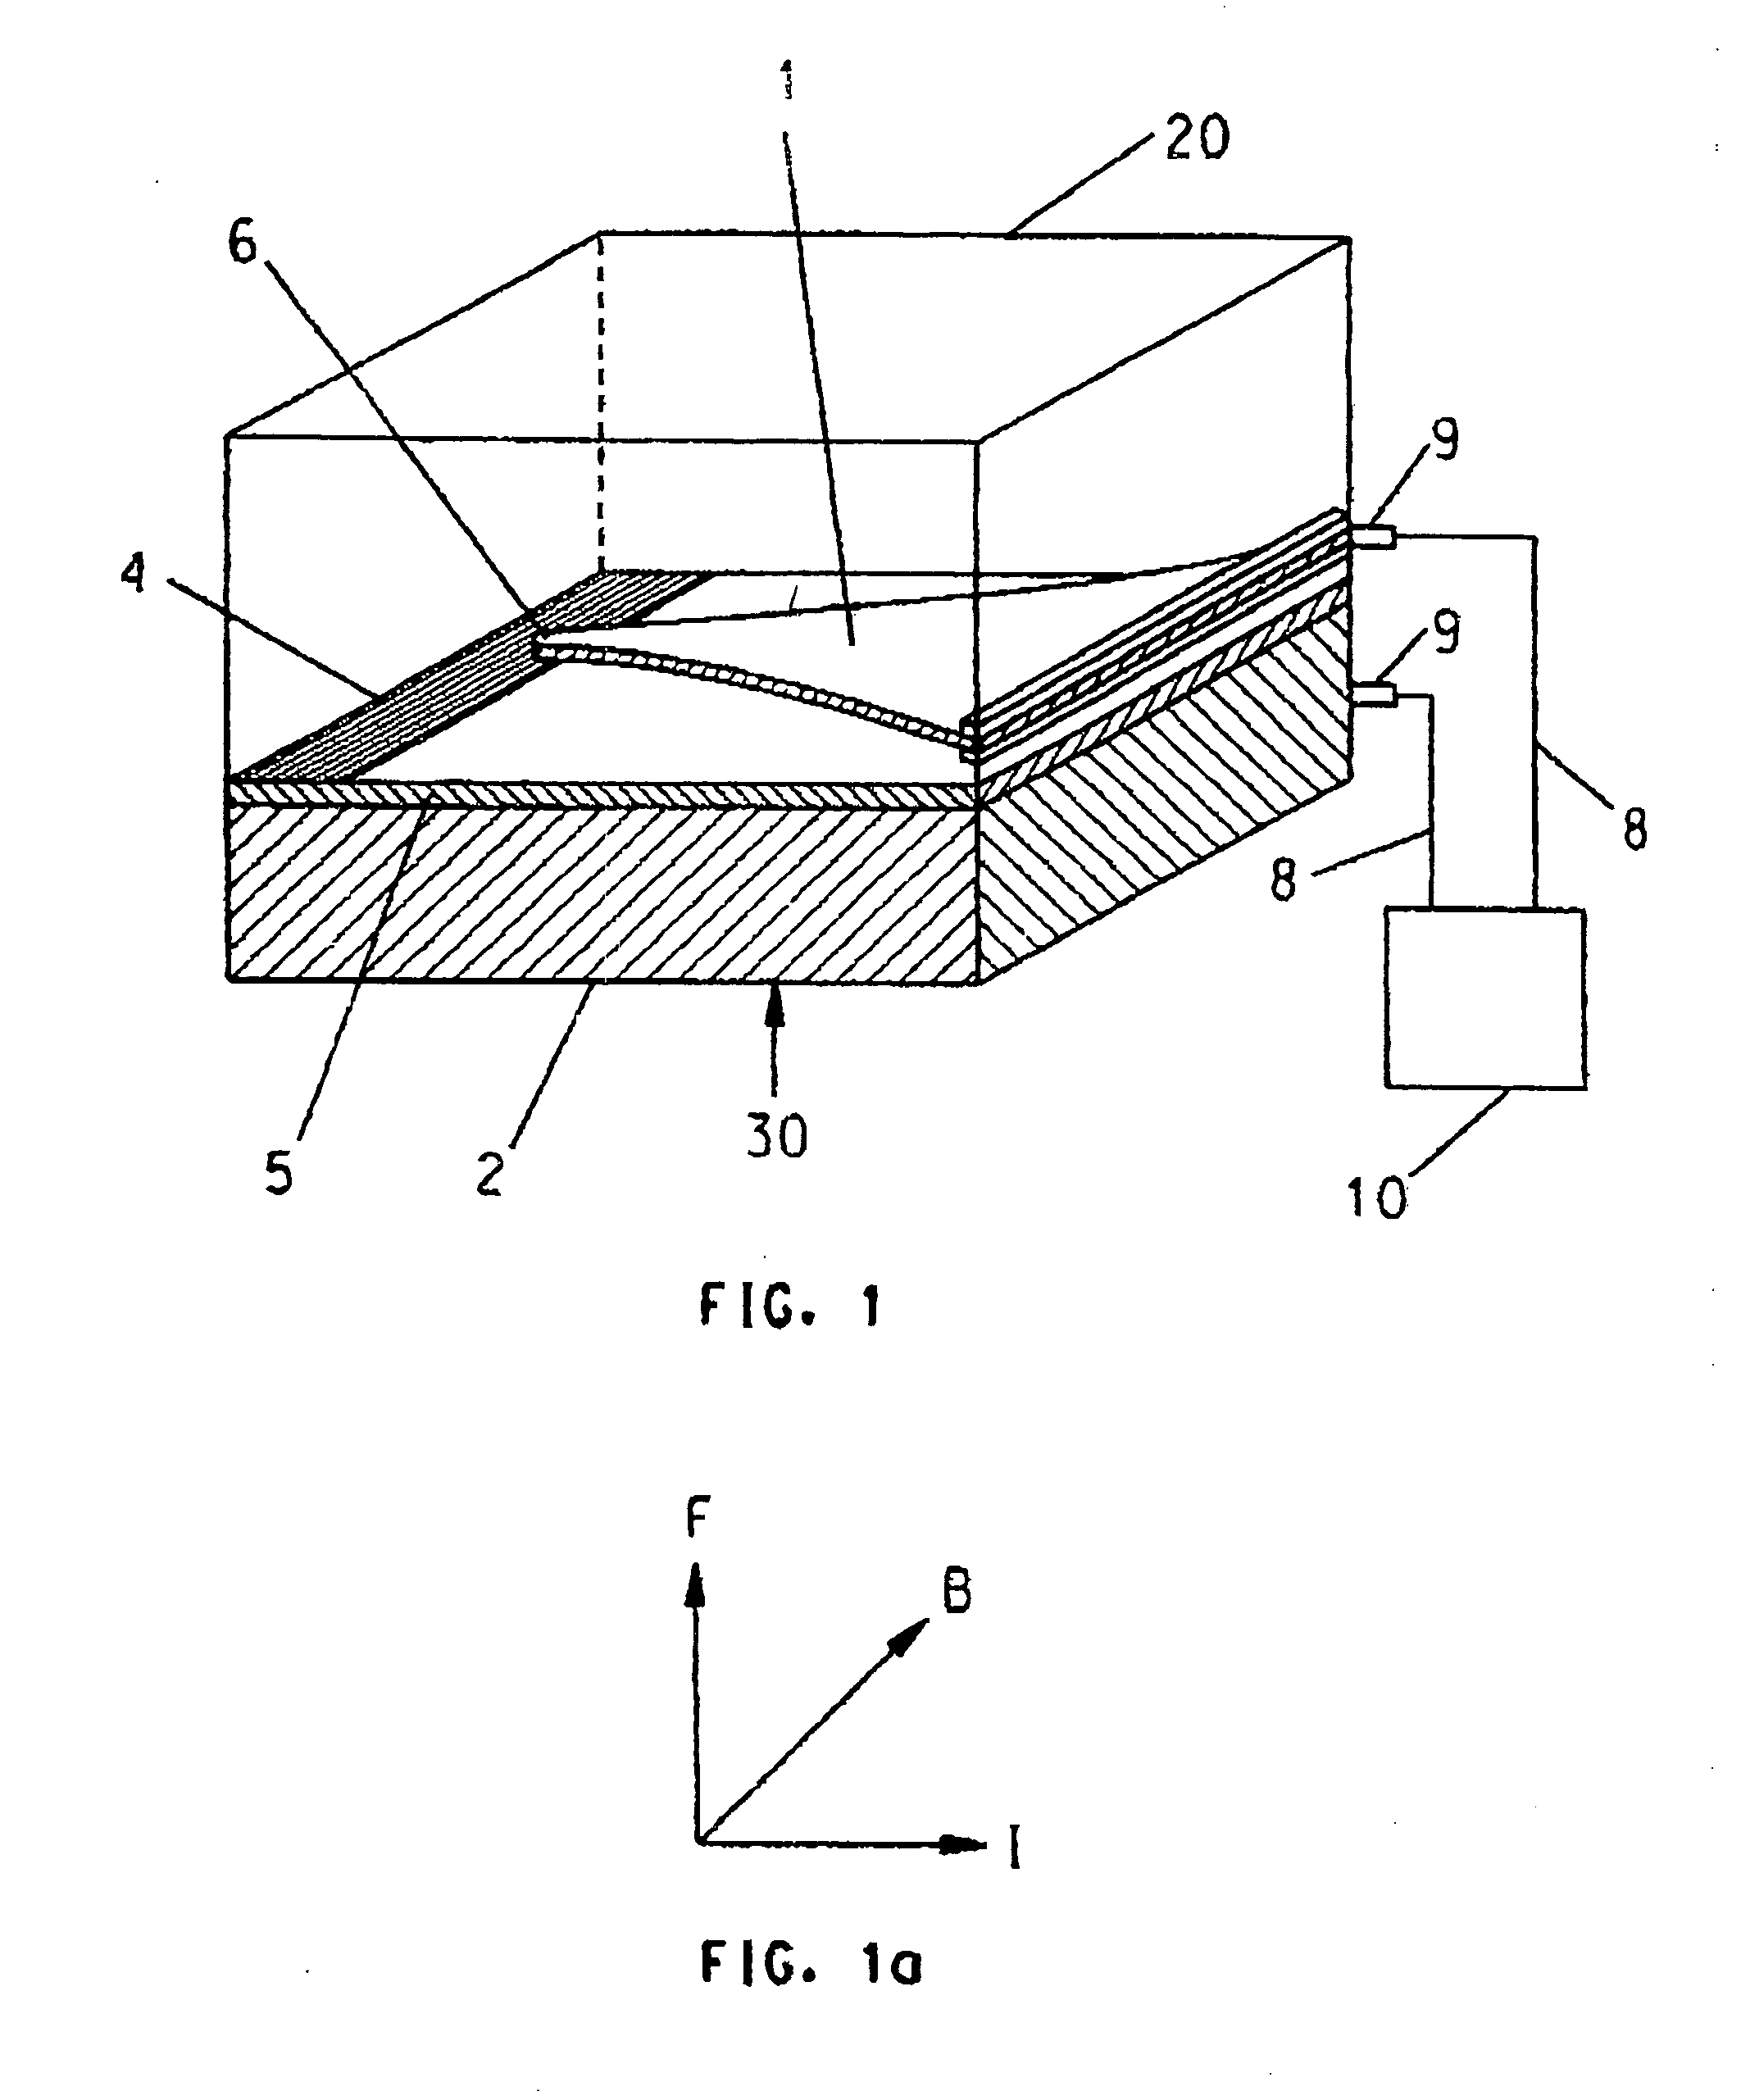 Closely spaced electrodes with a uniform gap